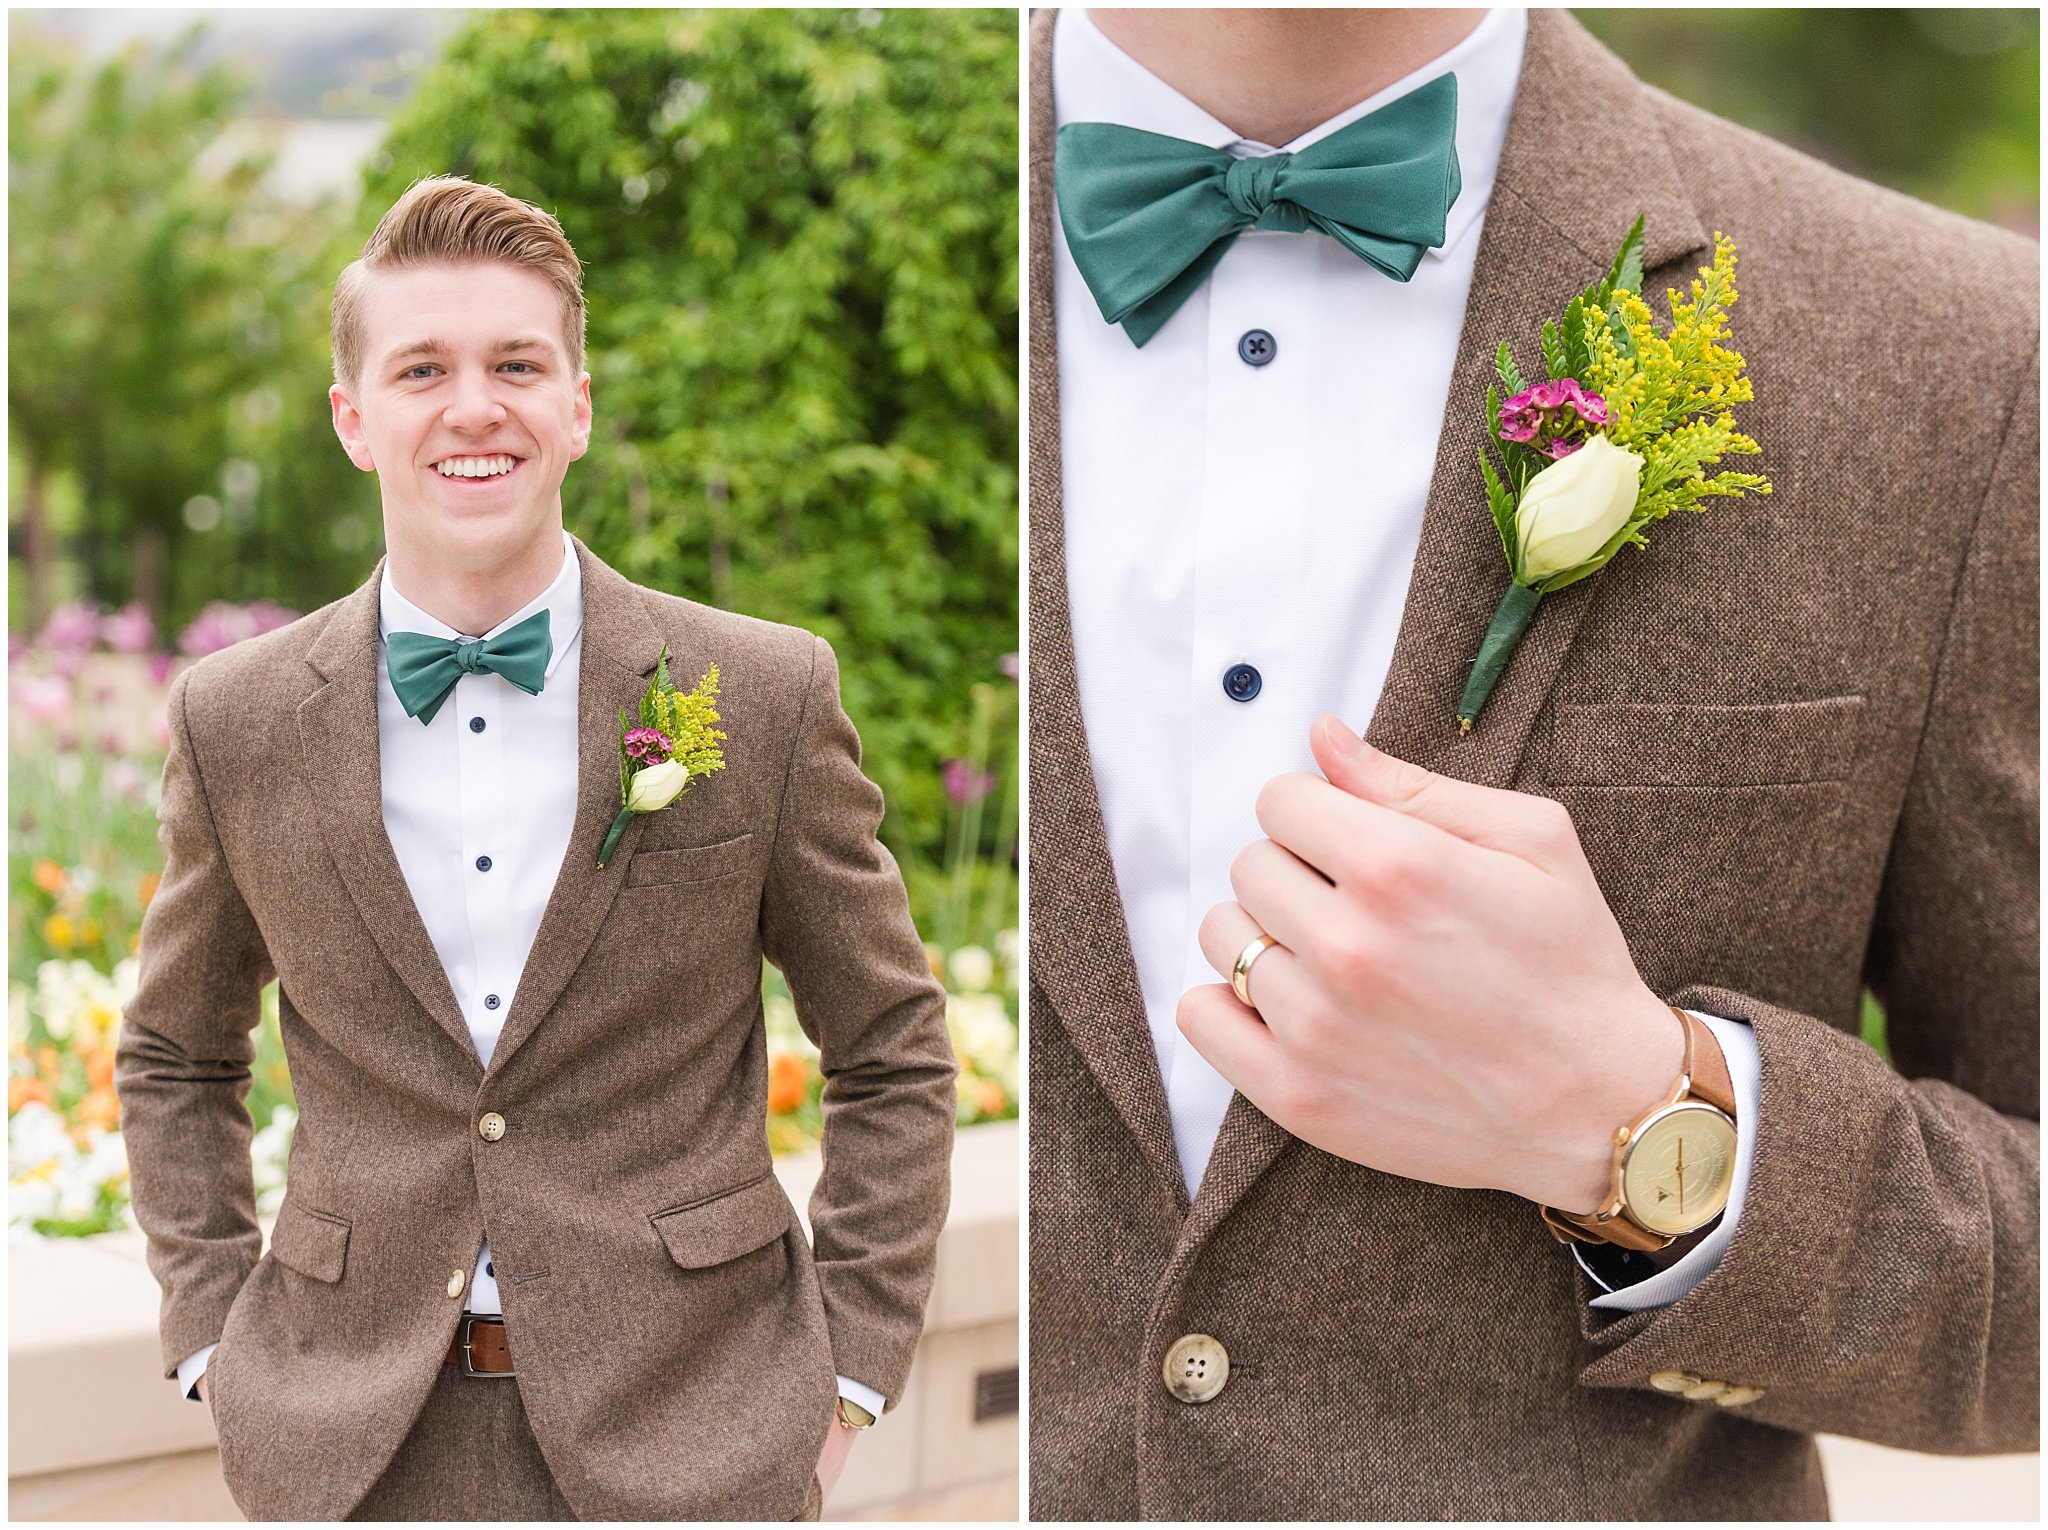 Groom wearing tweed suit and green bow tie for vintage inspired wedding attire | Emerald green, gold wedding colors | Provo City Center Temple Spring Formal Session | Jessie and Dallin Photography